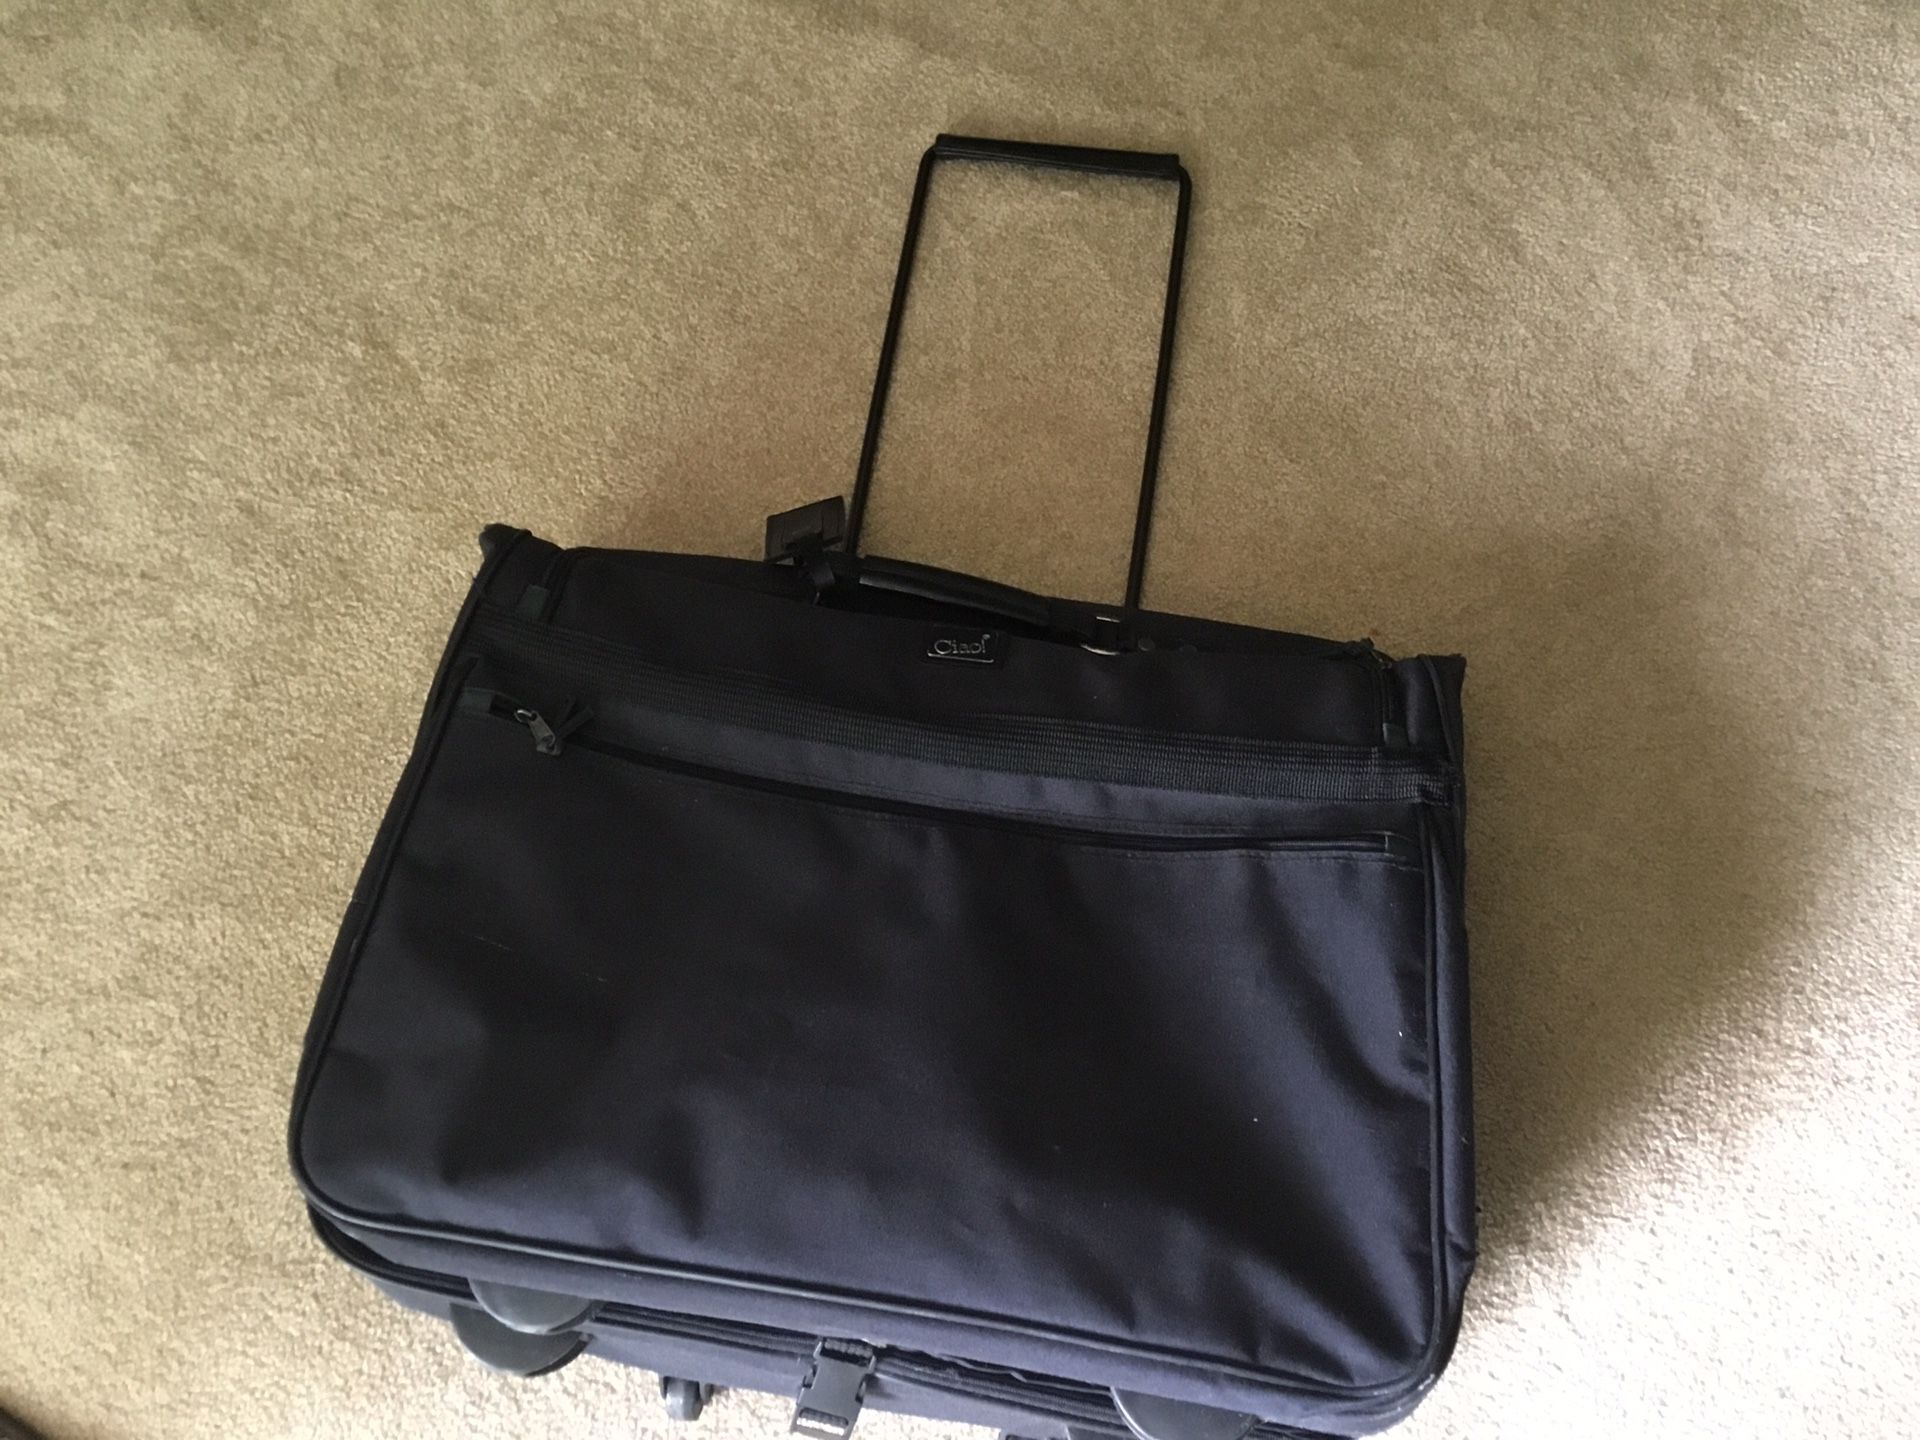 LUGGAGE CARRY ON PERSONAL HAND CARRIER FOR BUSINESS TRAVEL SUITS BAG BAGGAGE